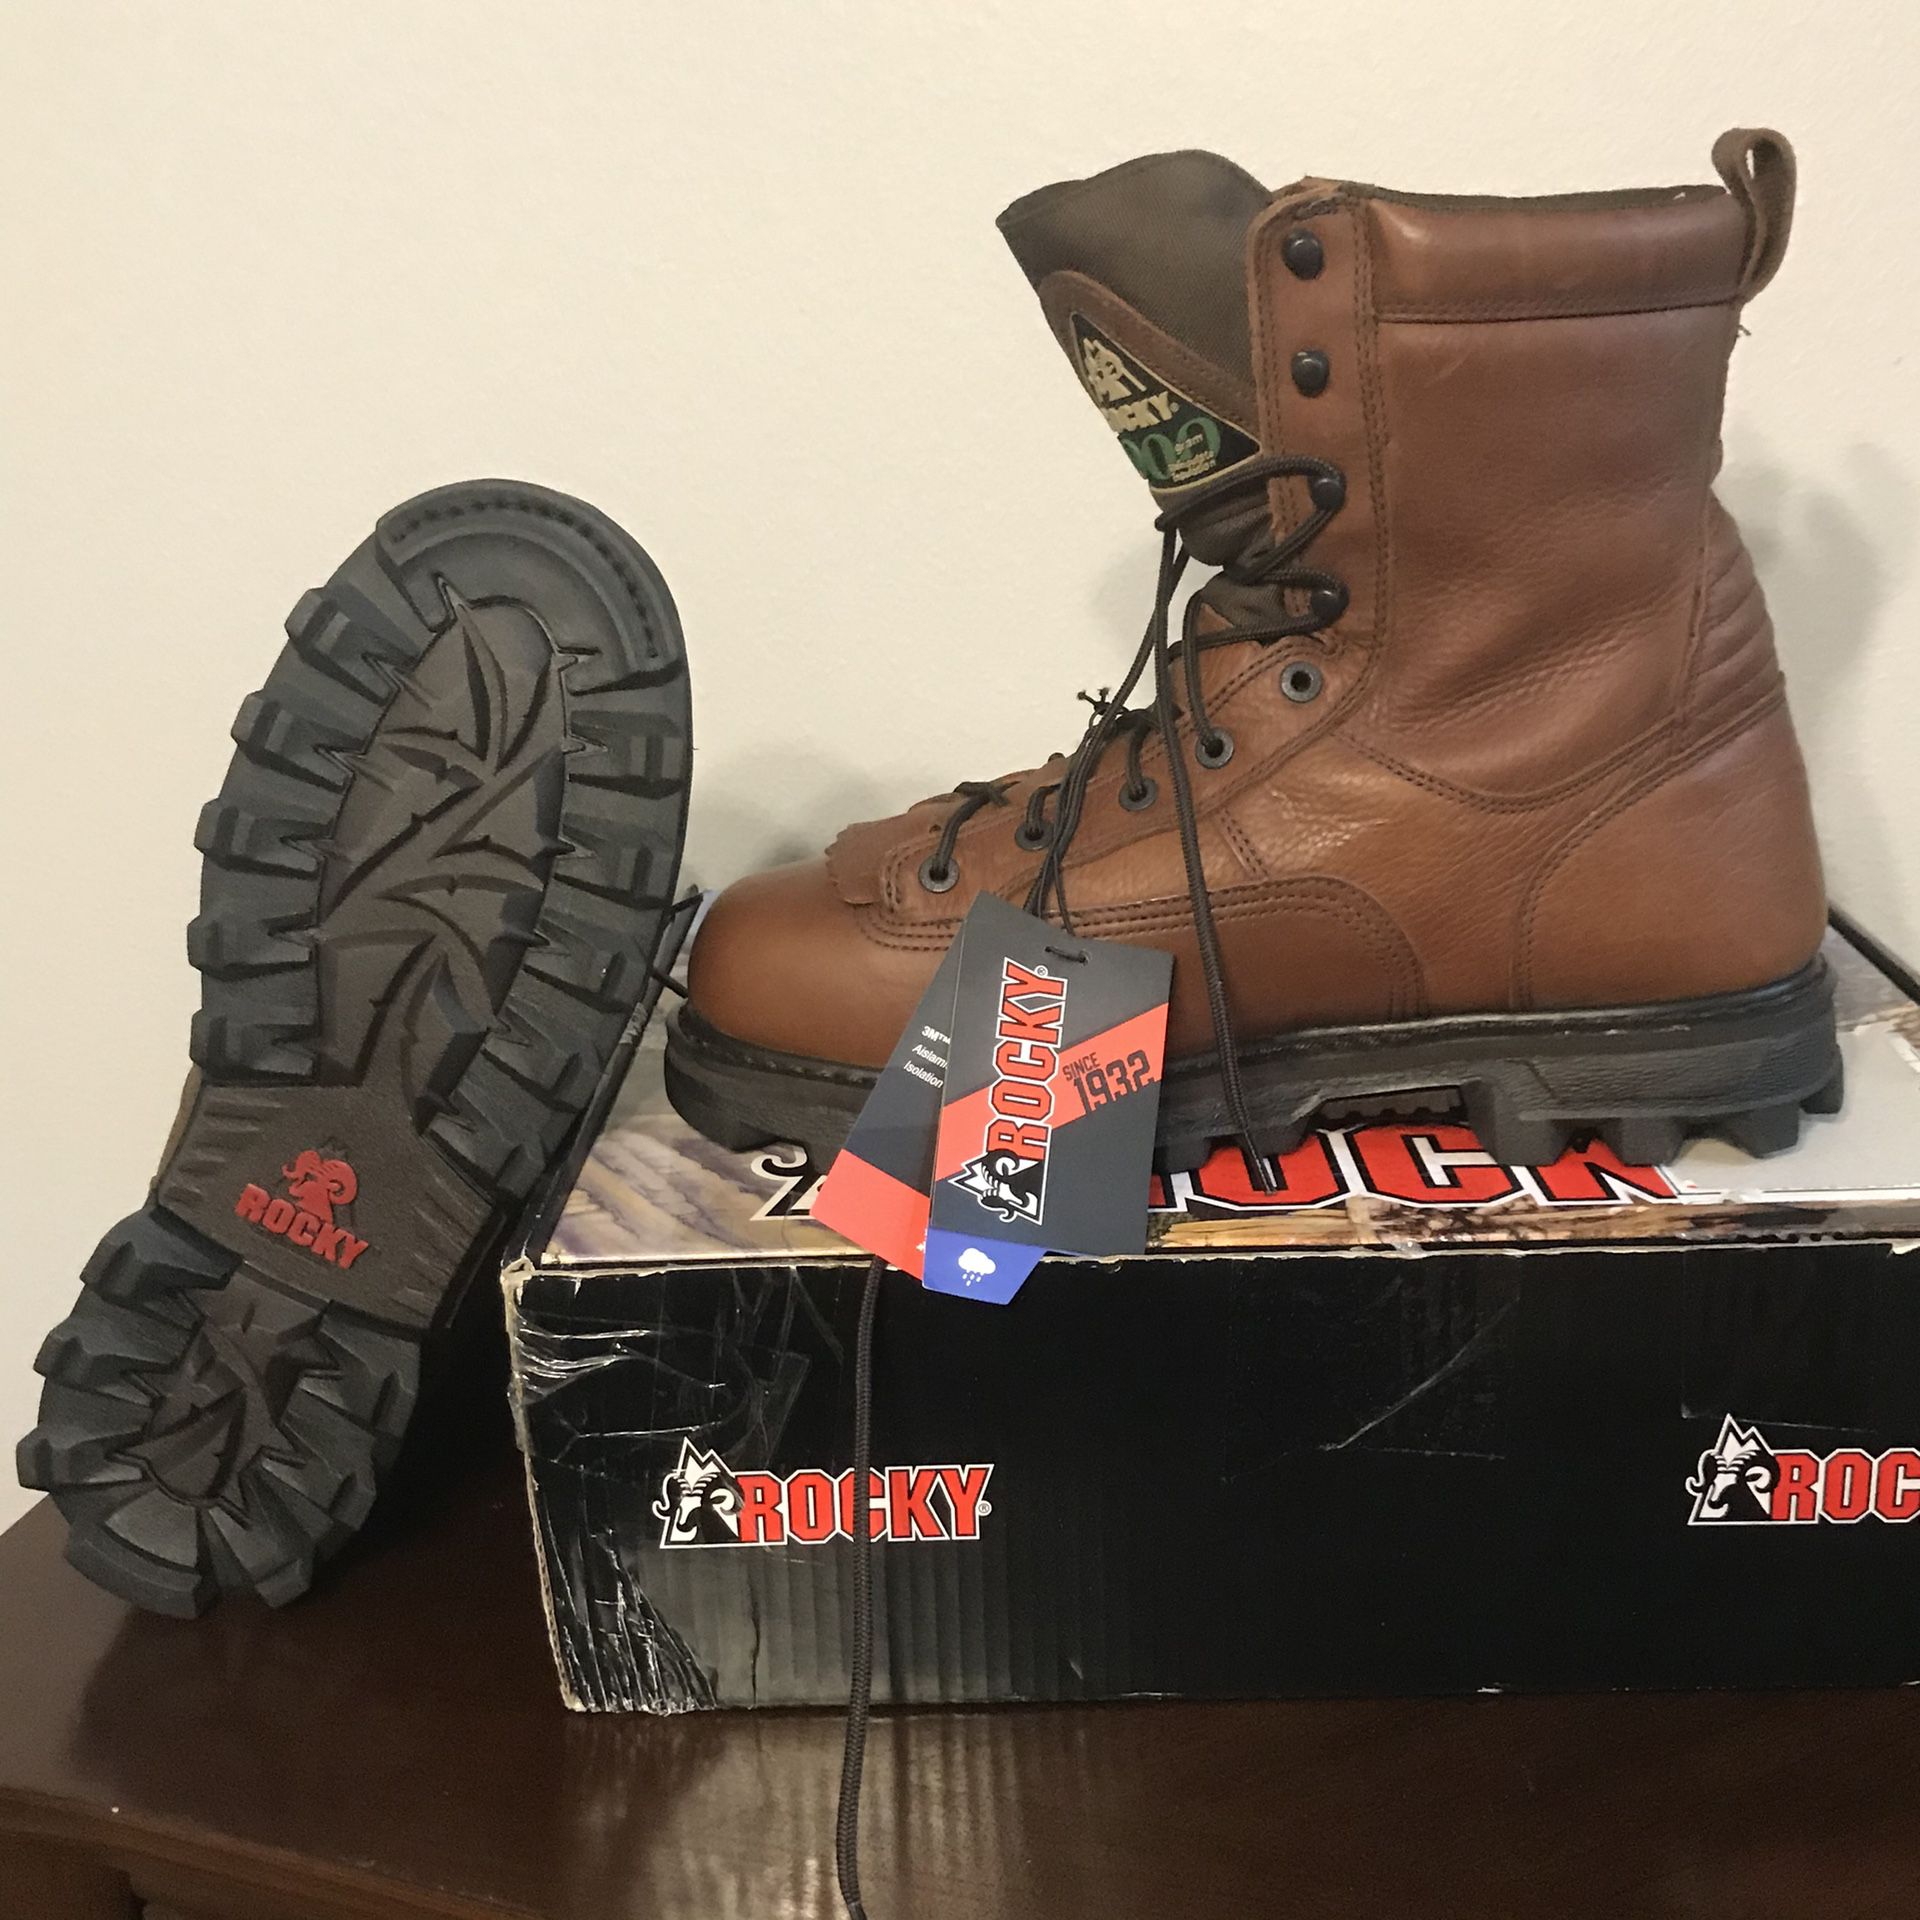 Rocky men’s bearclaw insulated waterproof hunting boot size 11.5 M ,brand new